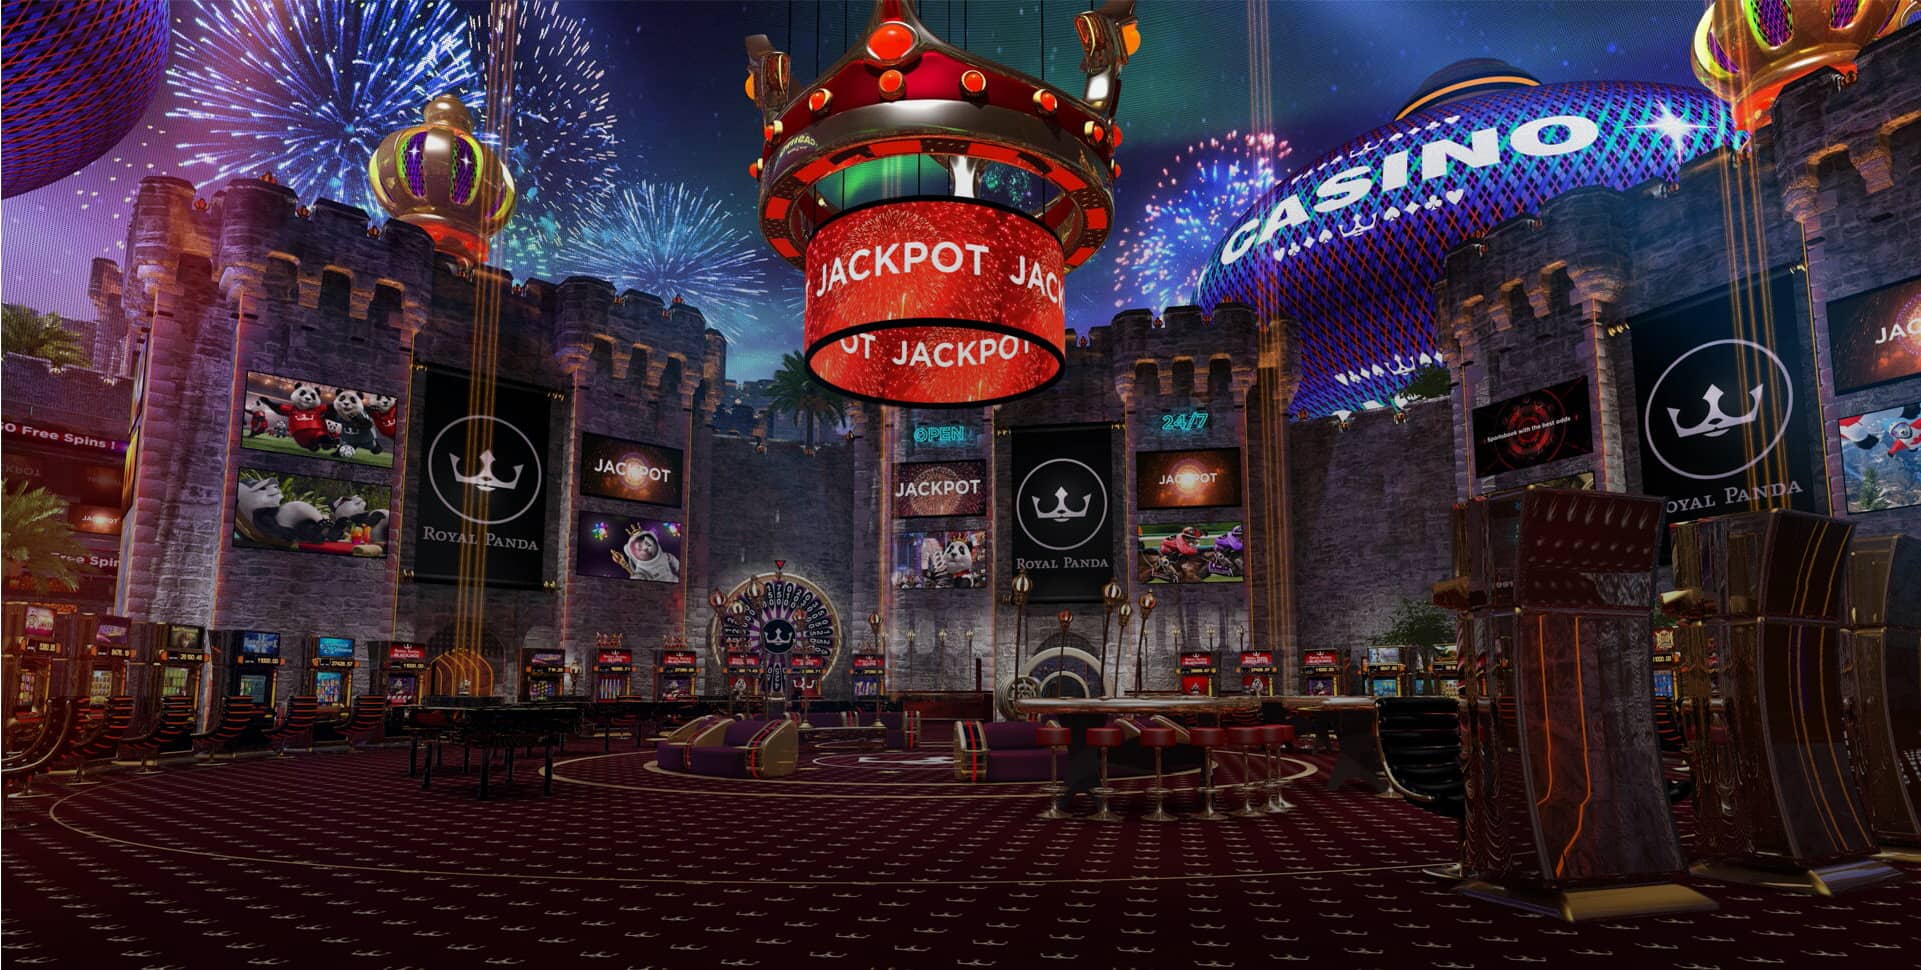 Royal Panda live casino website serves significant gambling markets in Europe, North America, and Asia and has earned a good reputation among its customers and rivals.